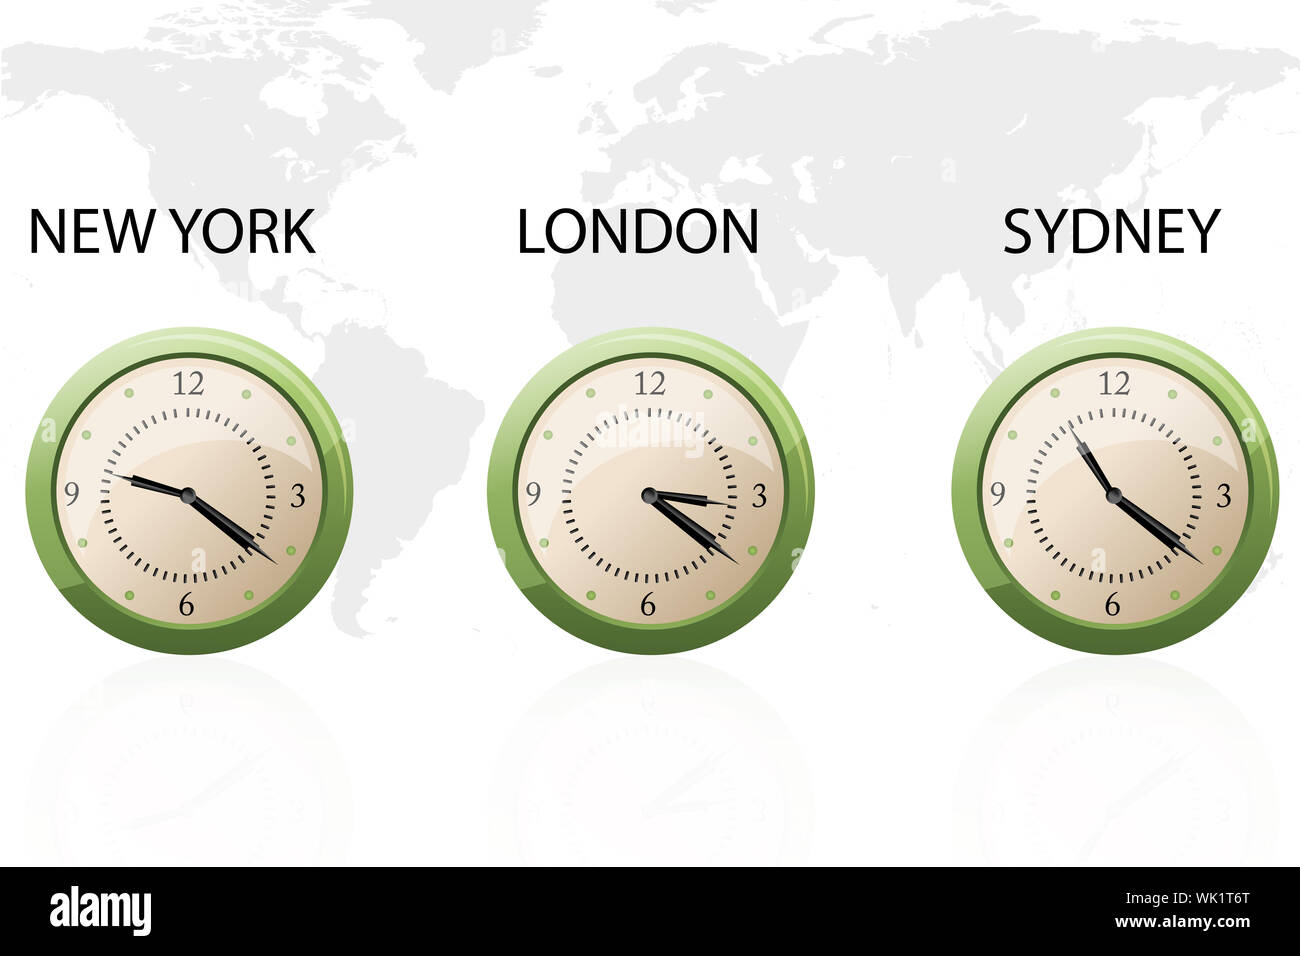 time difference between sydney & london